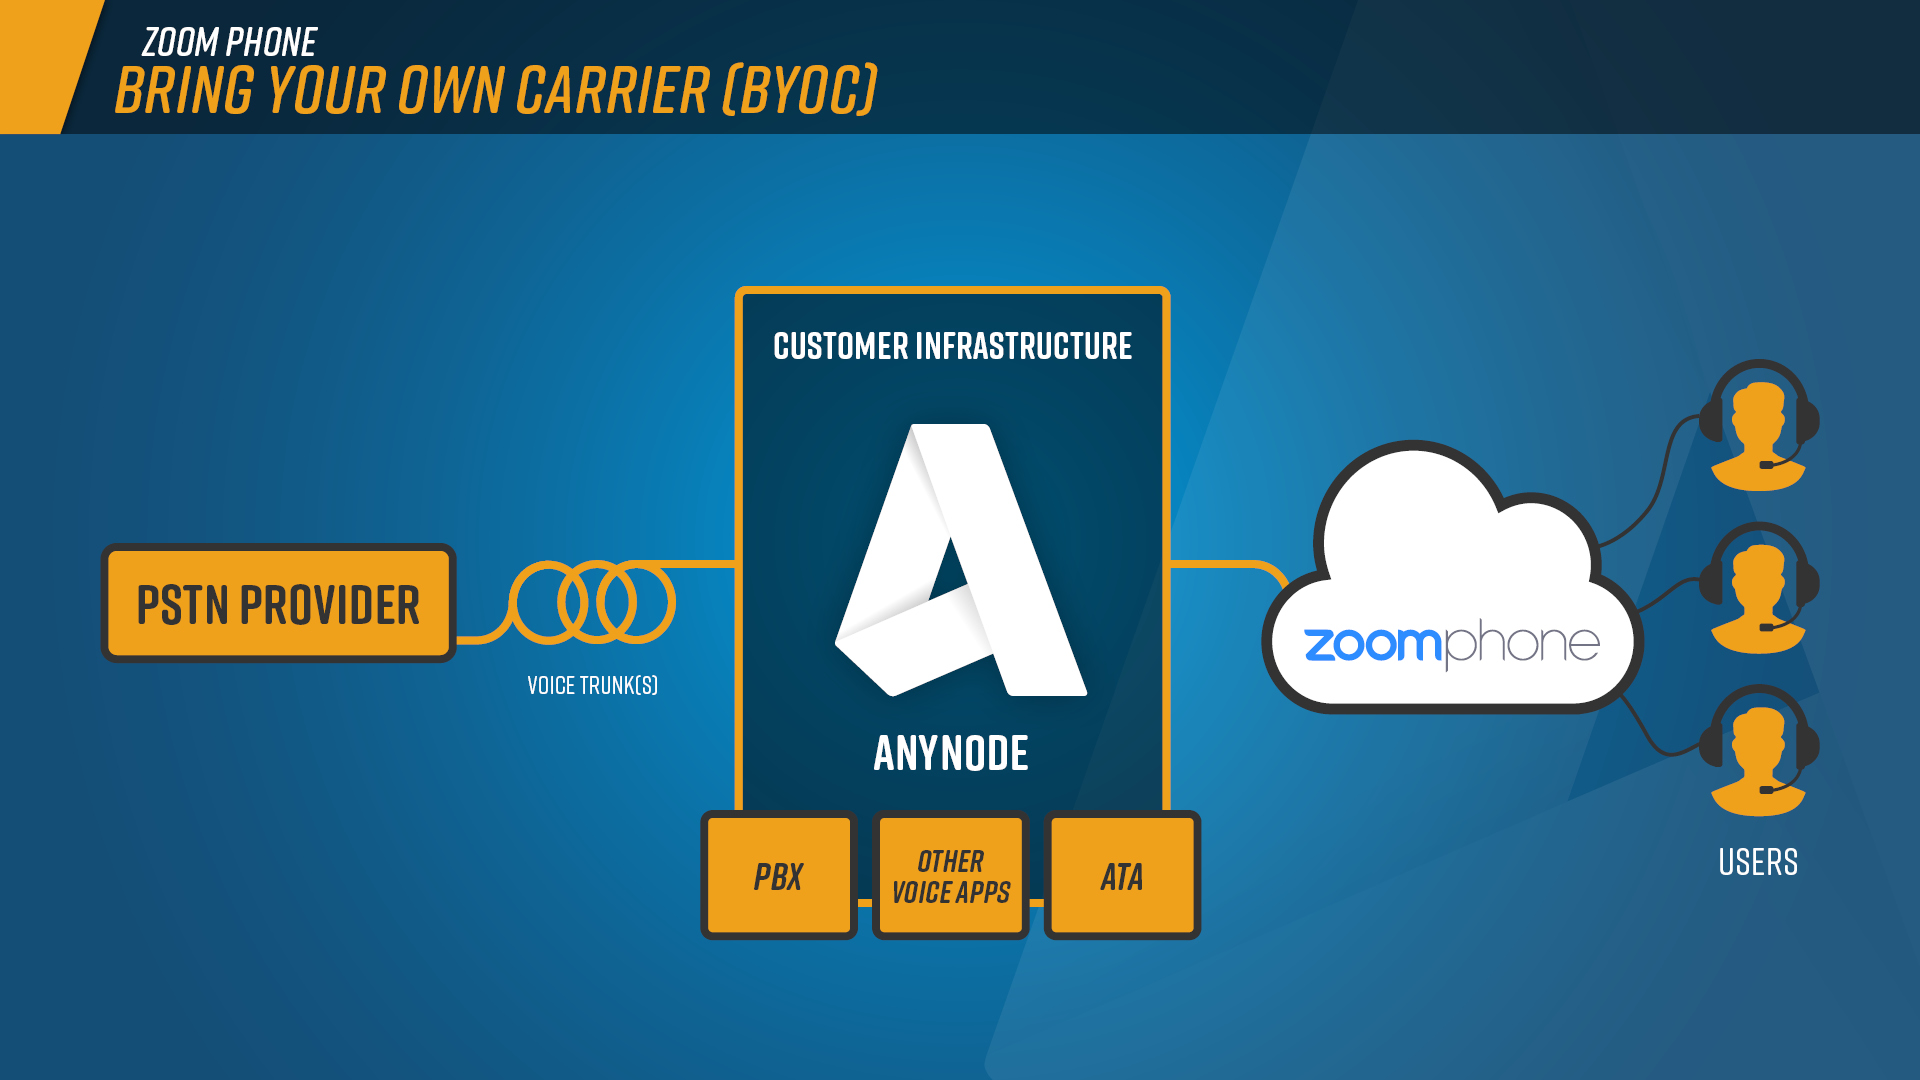 Infographic: With Zoom Phone Premise Peering, a voice trunk, and anynode, a connection to the Zoom Cloud can be established. Existing infrastructure at the customer's premises, such as a phone system (PBX) or voice services, can be utilized and integrated.